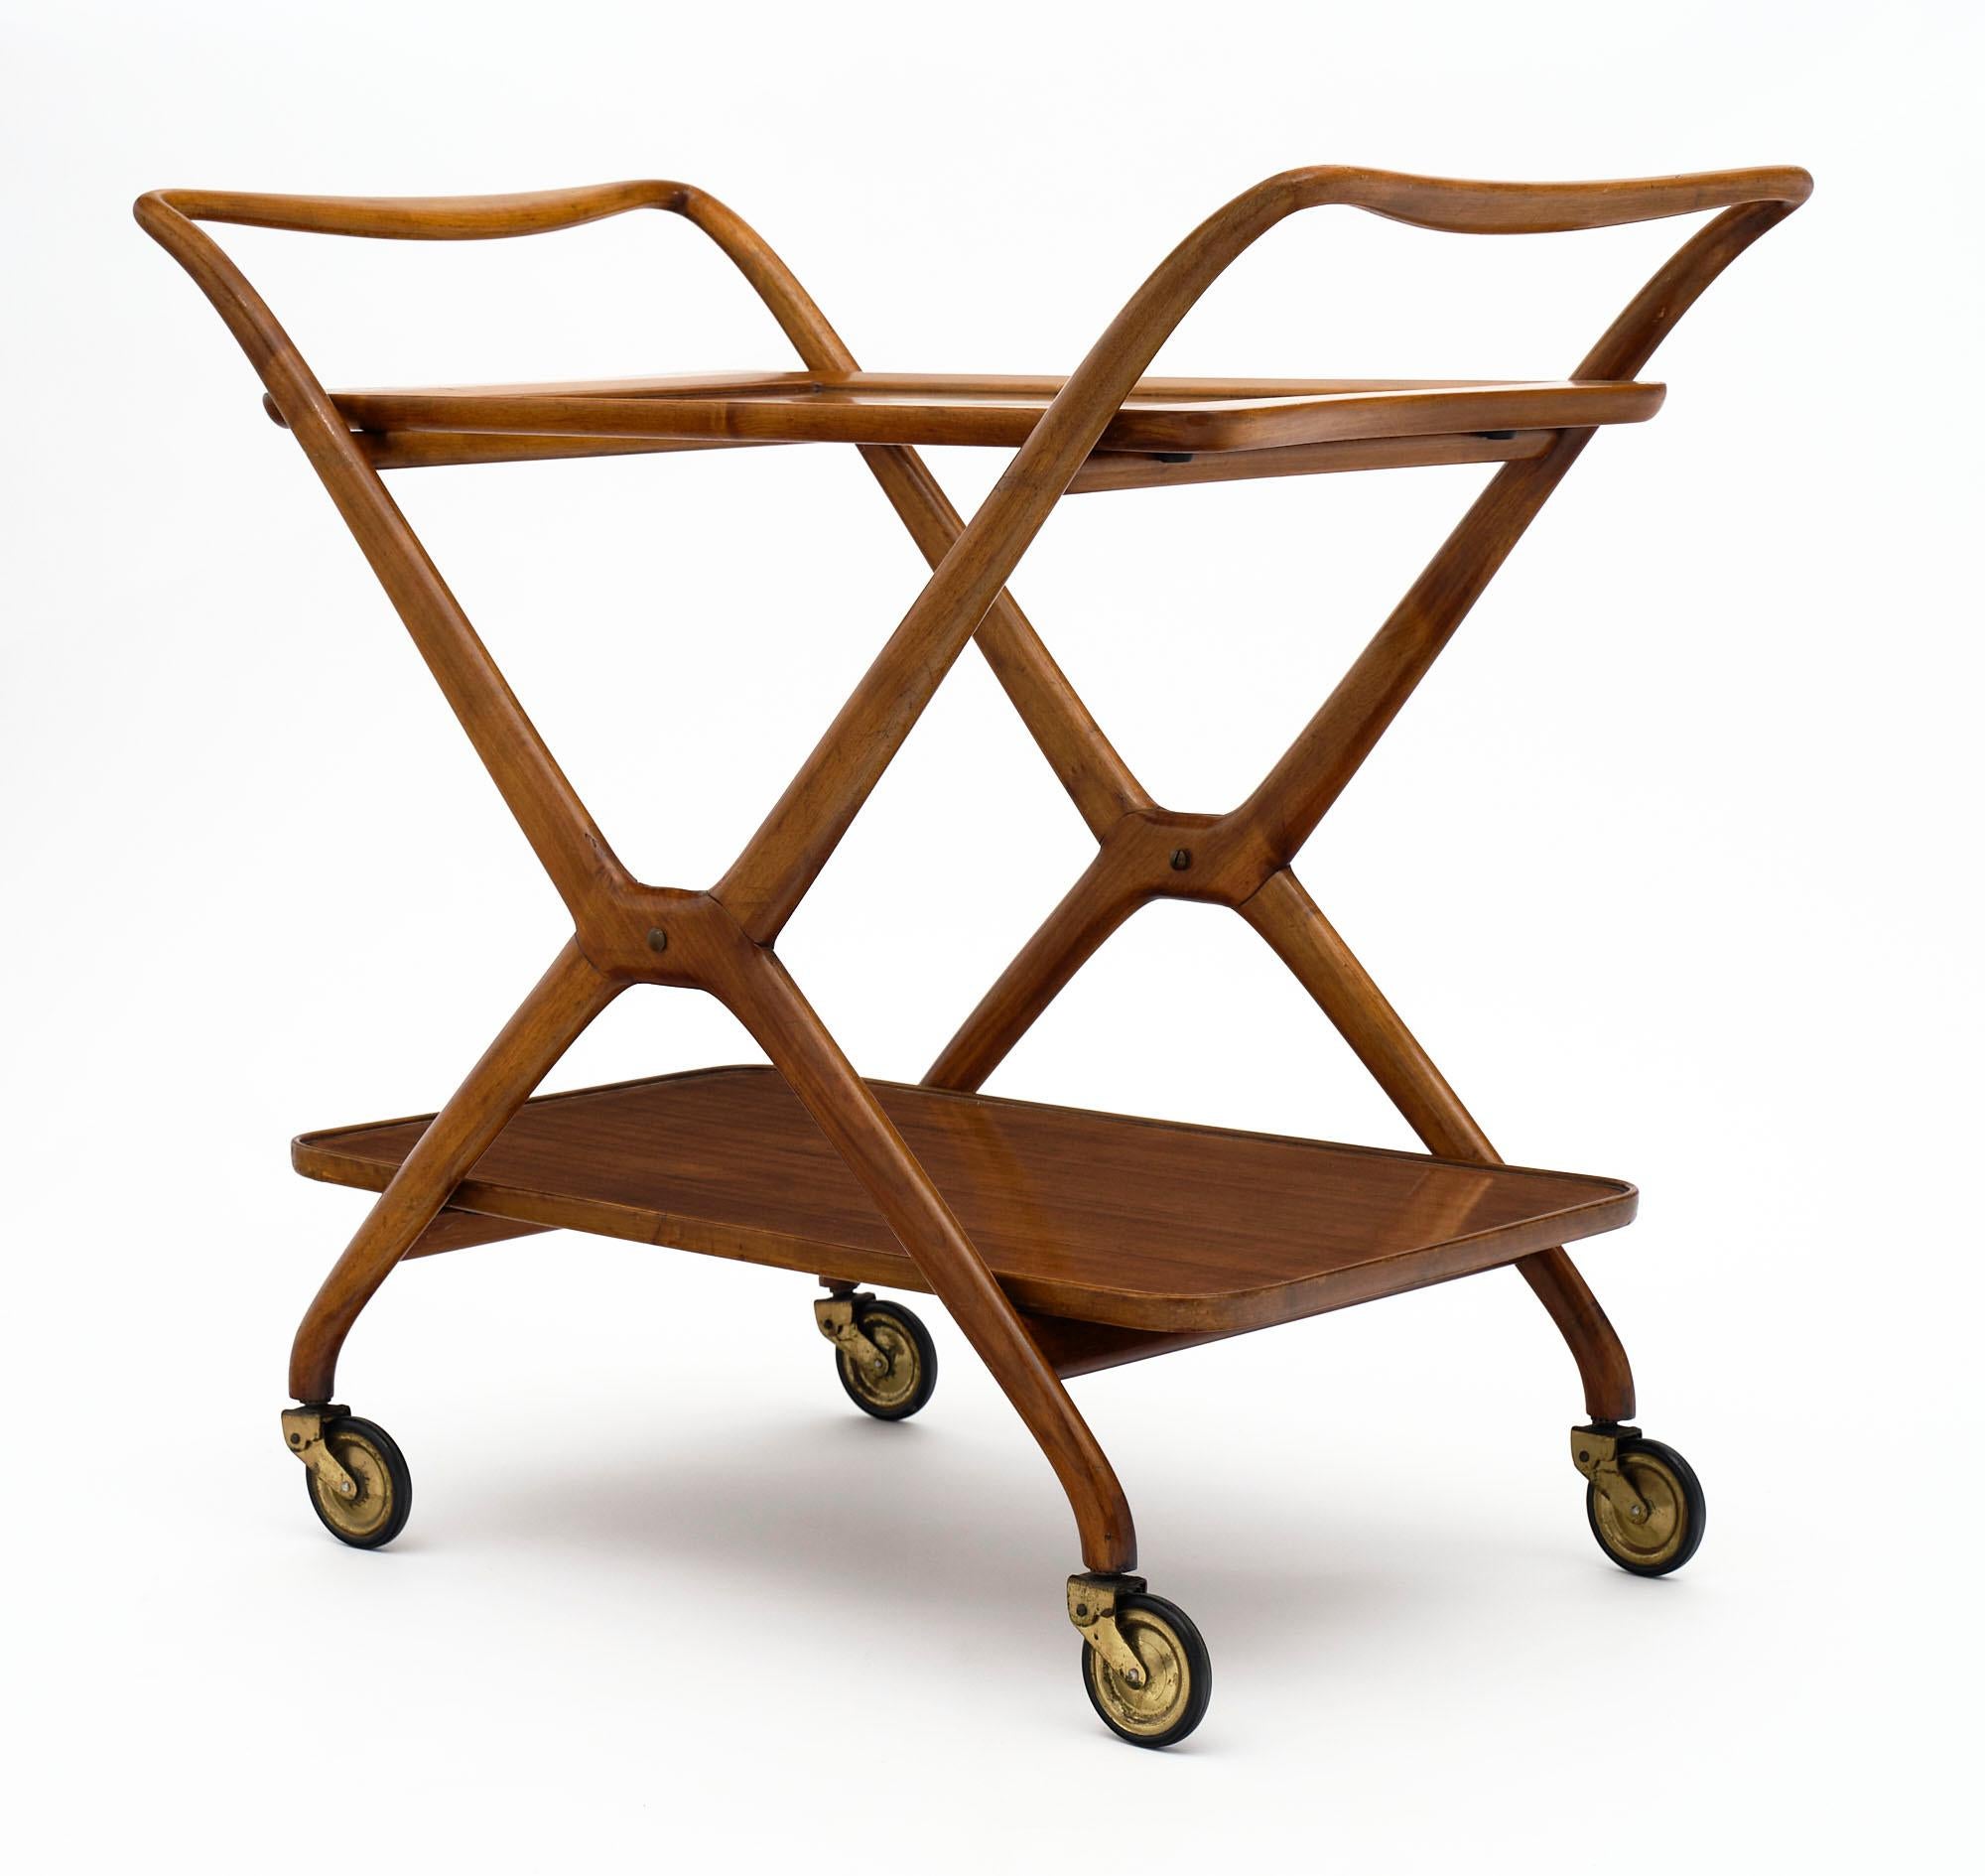 The tea trolley model 67 is characterized by a structure formed by the union of two X-shaped supporting elements, in solid wood, joined at the top by shaped handlebars; opposed and stiffened by crosspieces placed under the two support surfaces. The